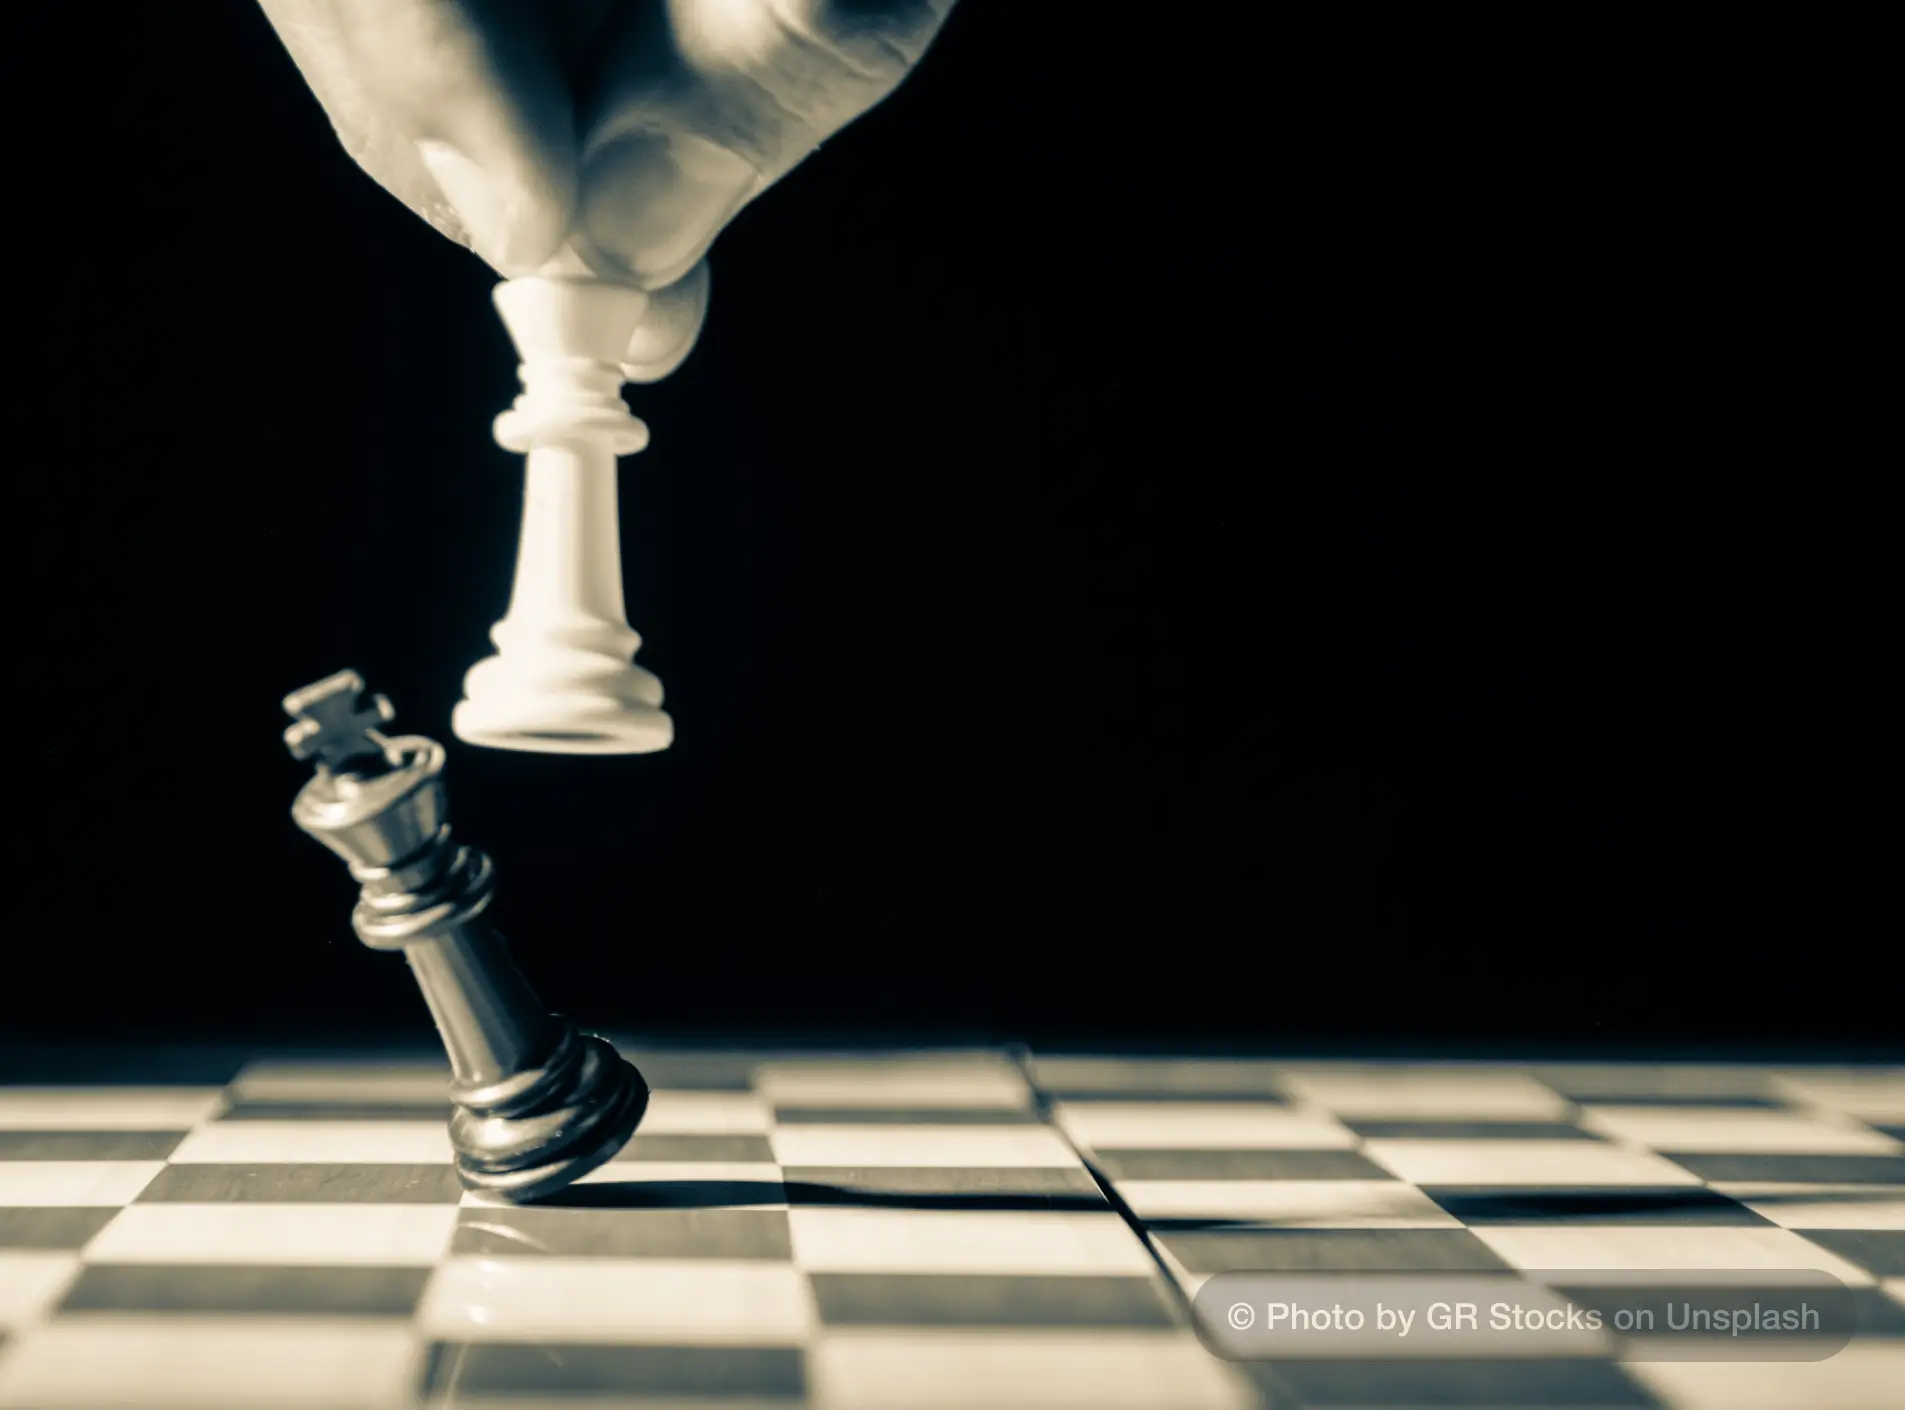 How to Play Chess: 4 Basic Rules of Chess You Must Know